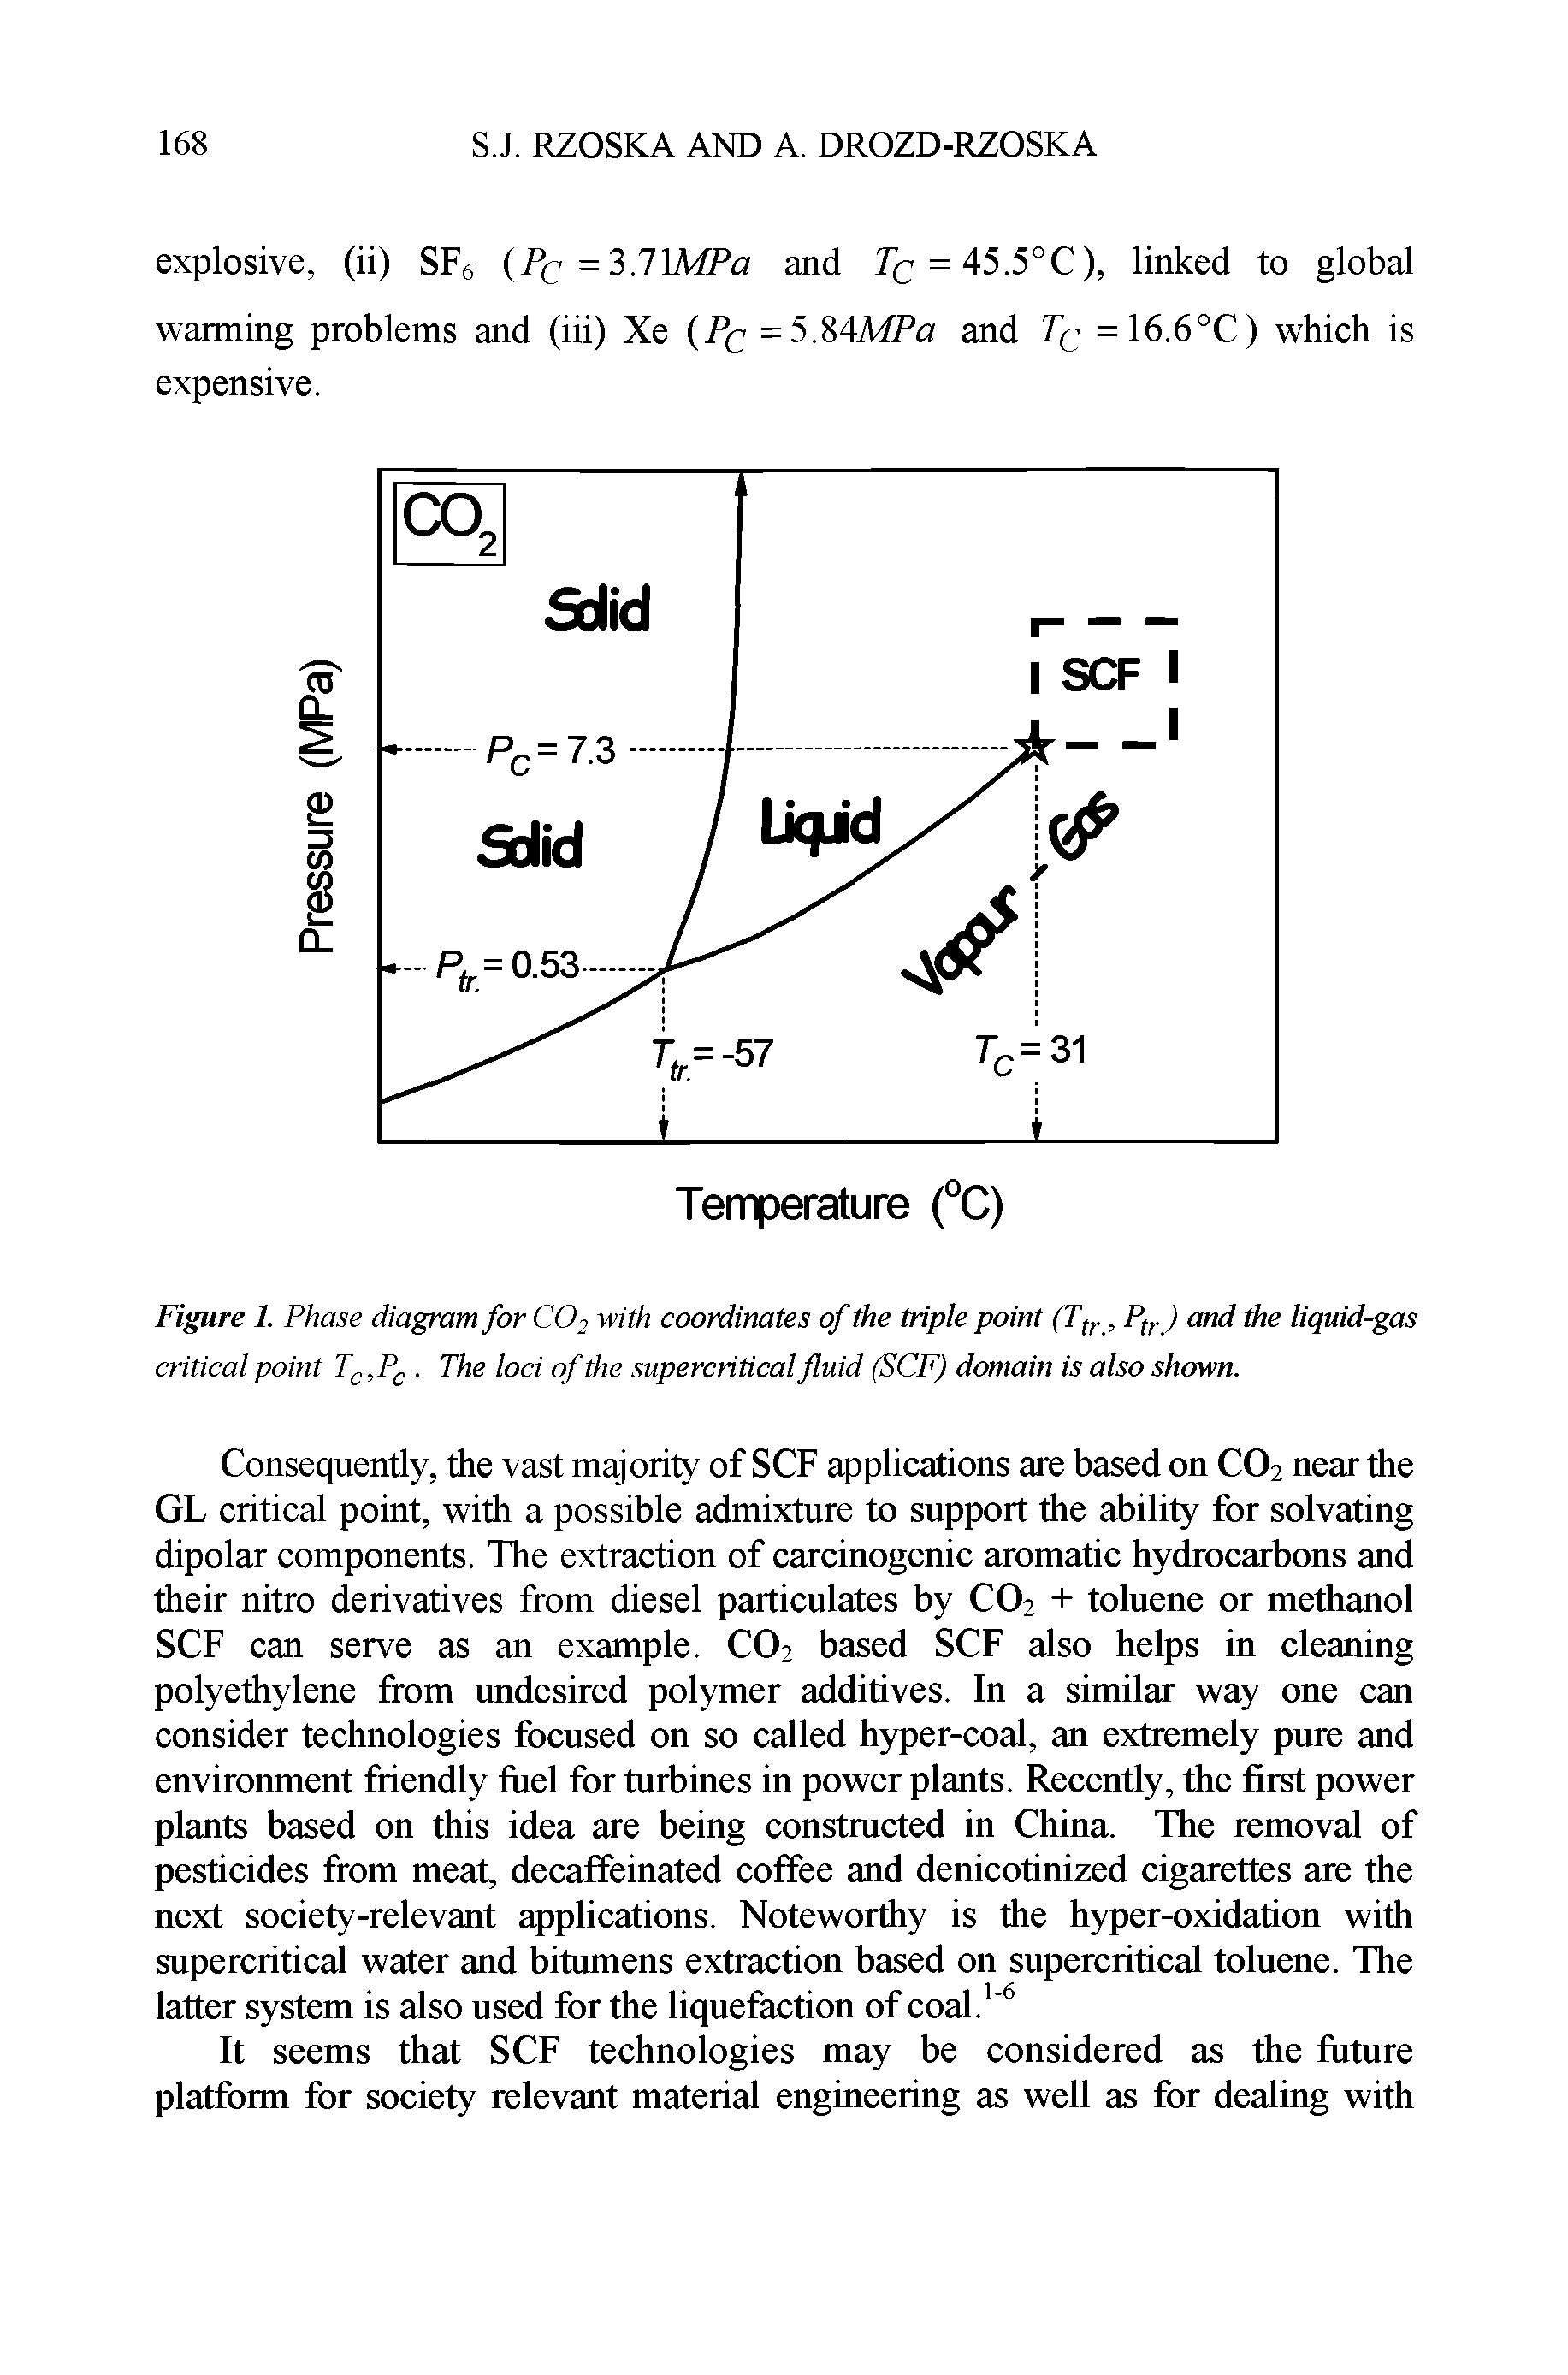 Figure 1. Phase diagram for CO 2 "with coordinates of the triple point (T(f, PtrJ and the liquid-gas critical point T, P. The loci of the supercritical fluid (SCF) domain is also shown.